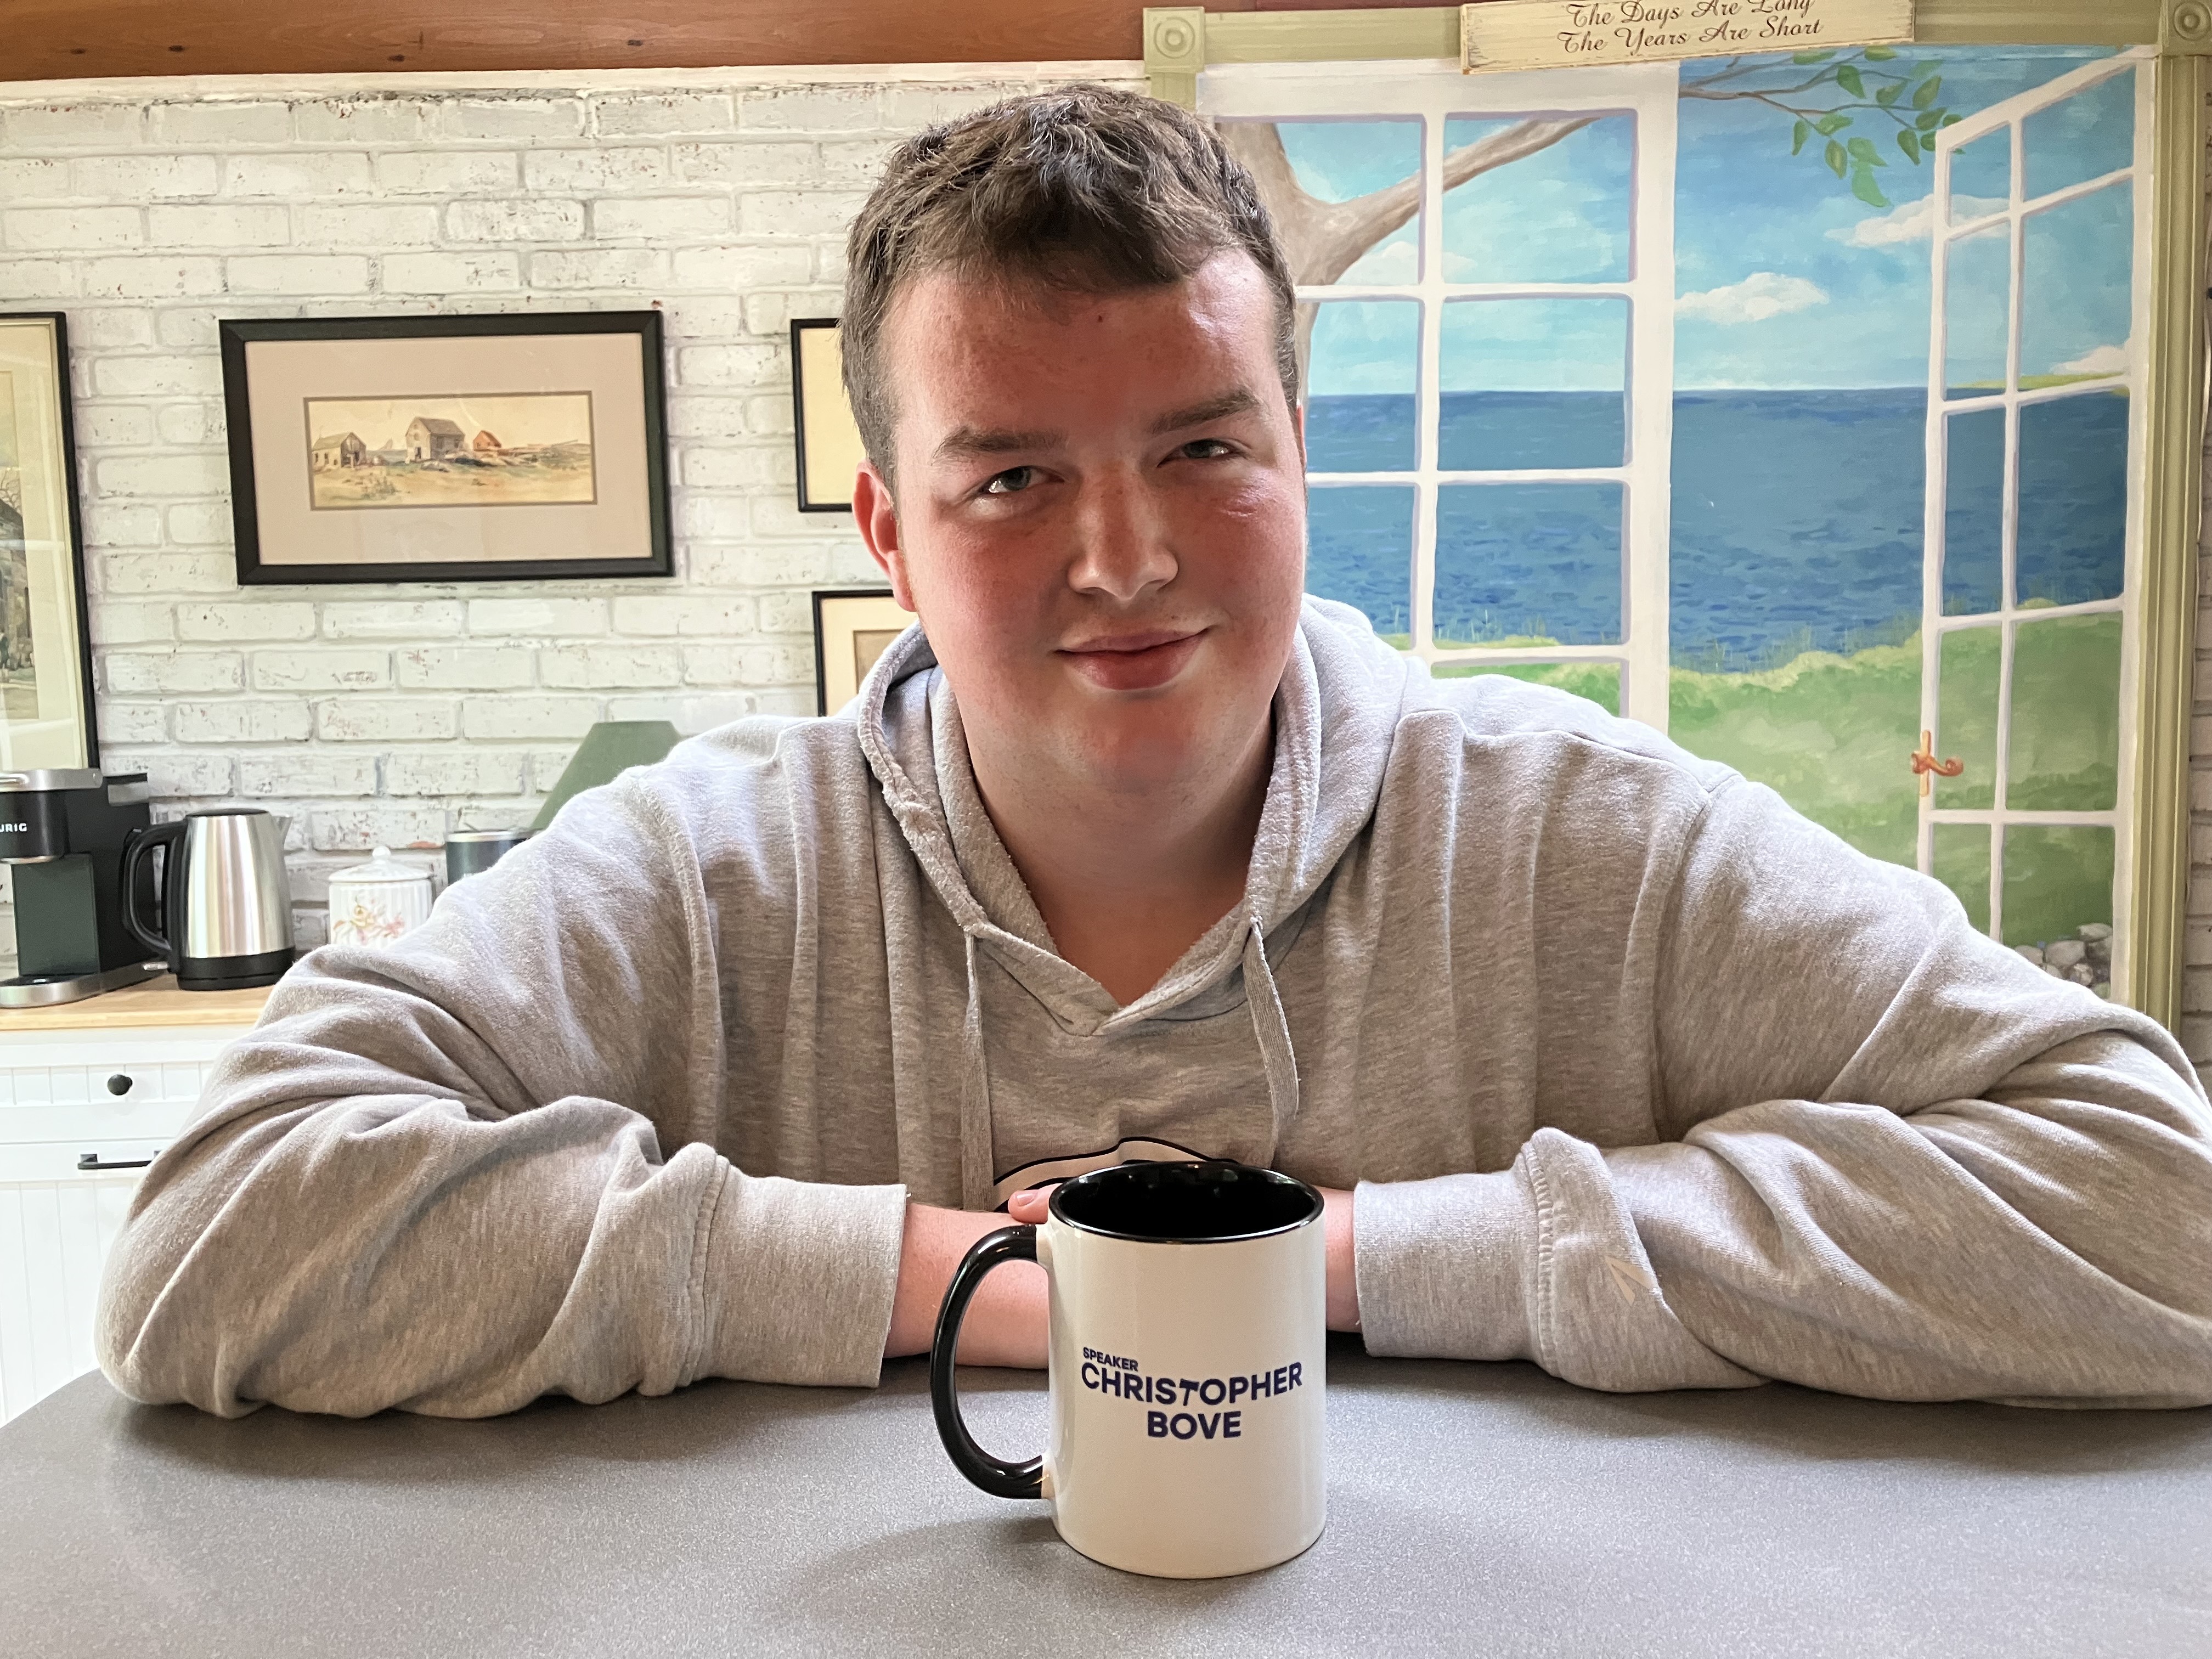 Chris Bove has a coffee mug that features his title as secretary of the student senate at URI. Planning a career in public service, Bove had internships in the offices of Senator Sheldon Whitehouse and former congressman David Cicilline during the summer of 2022. 